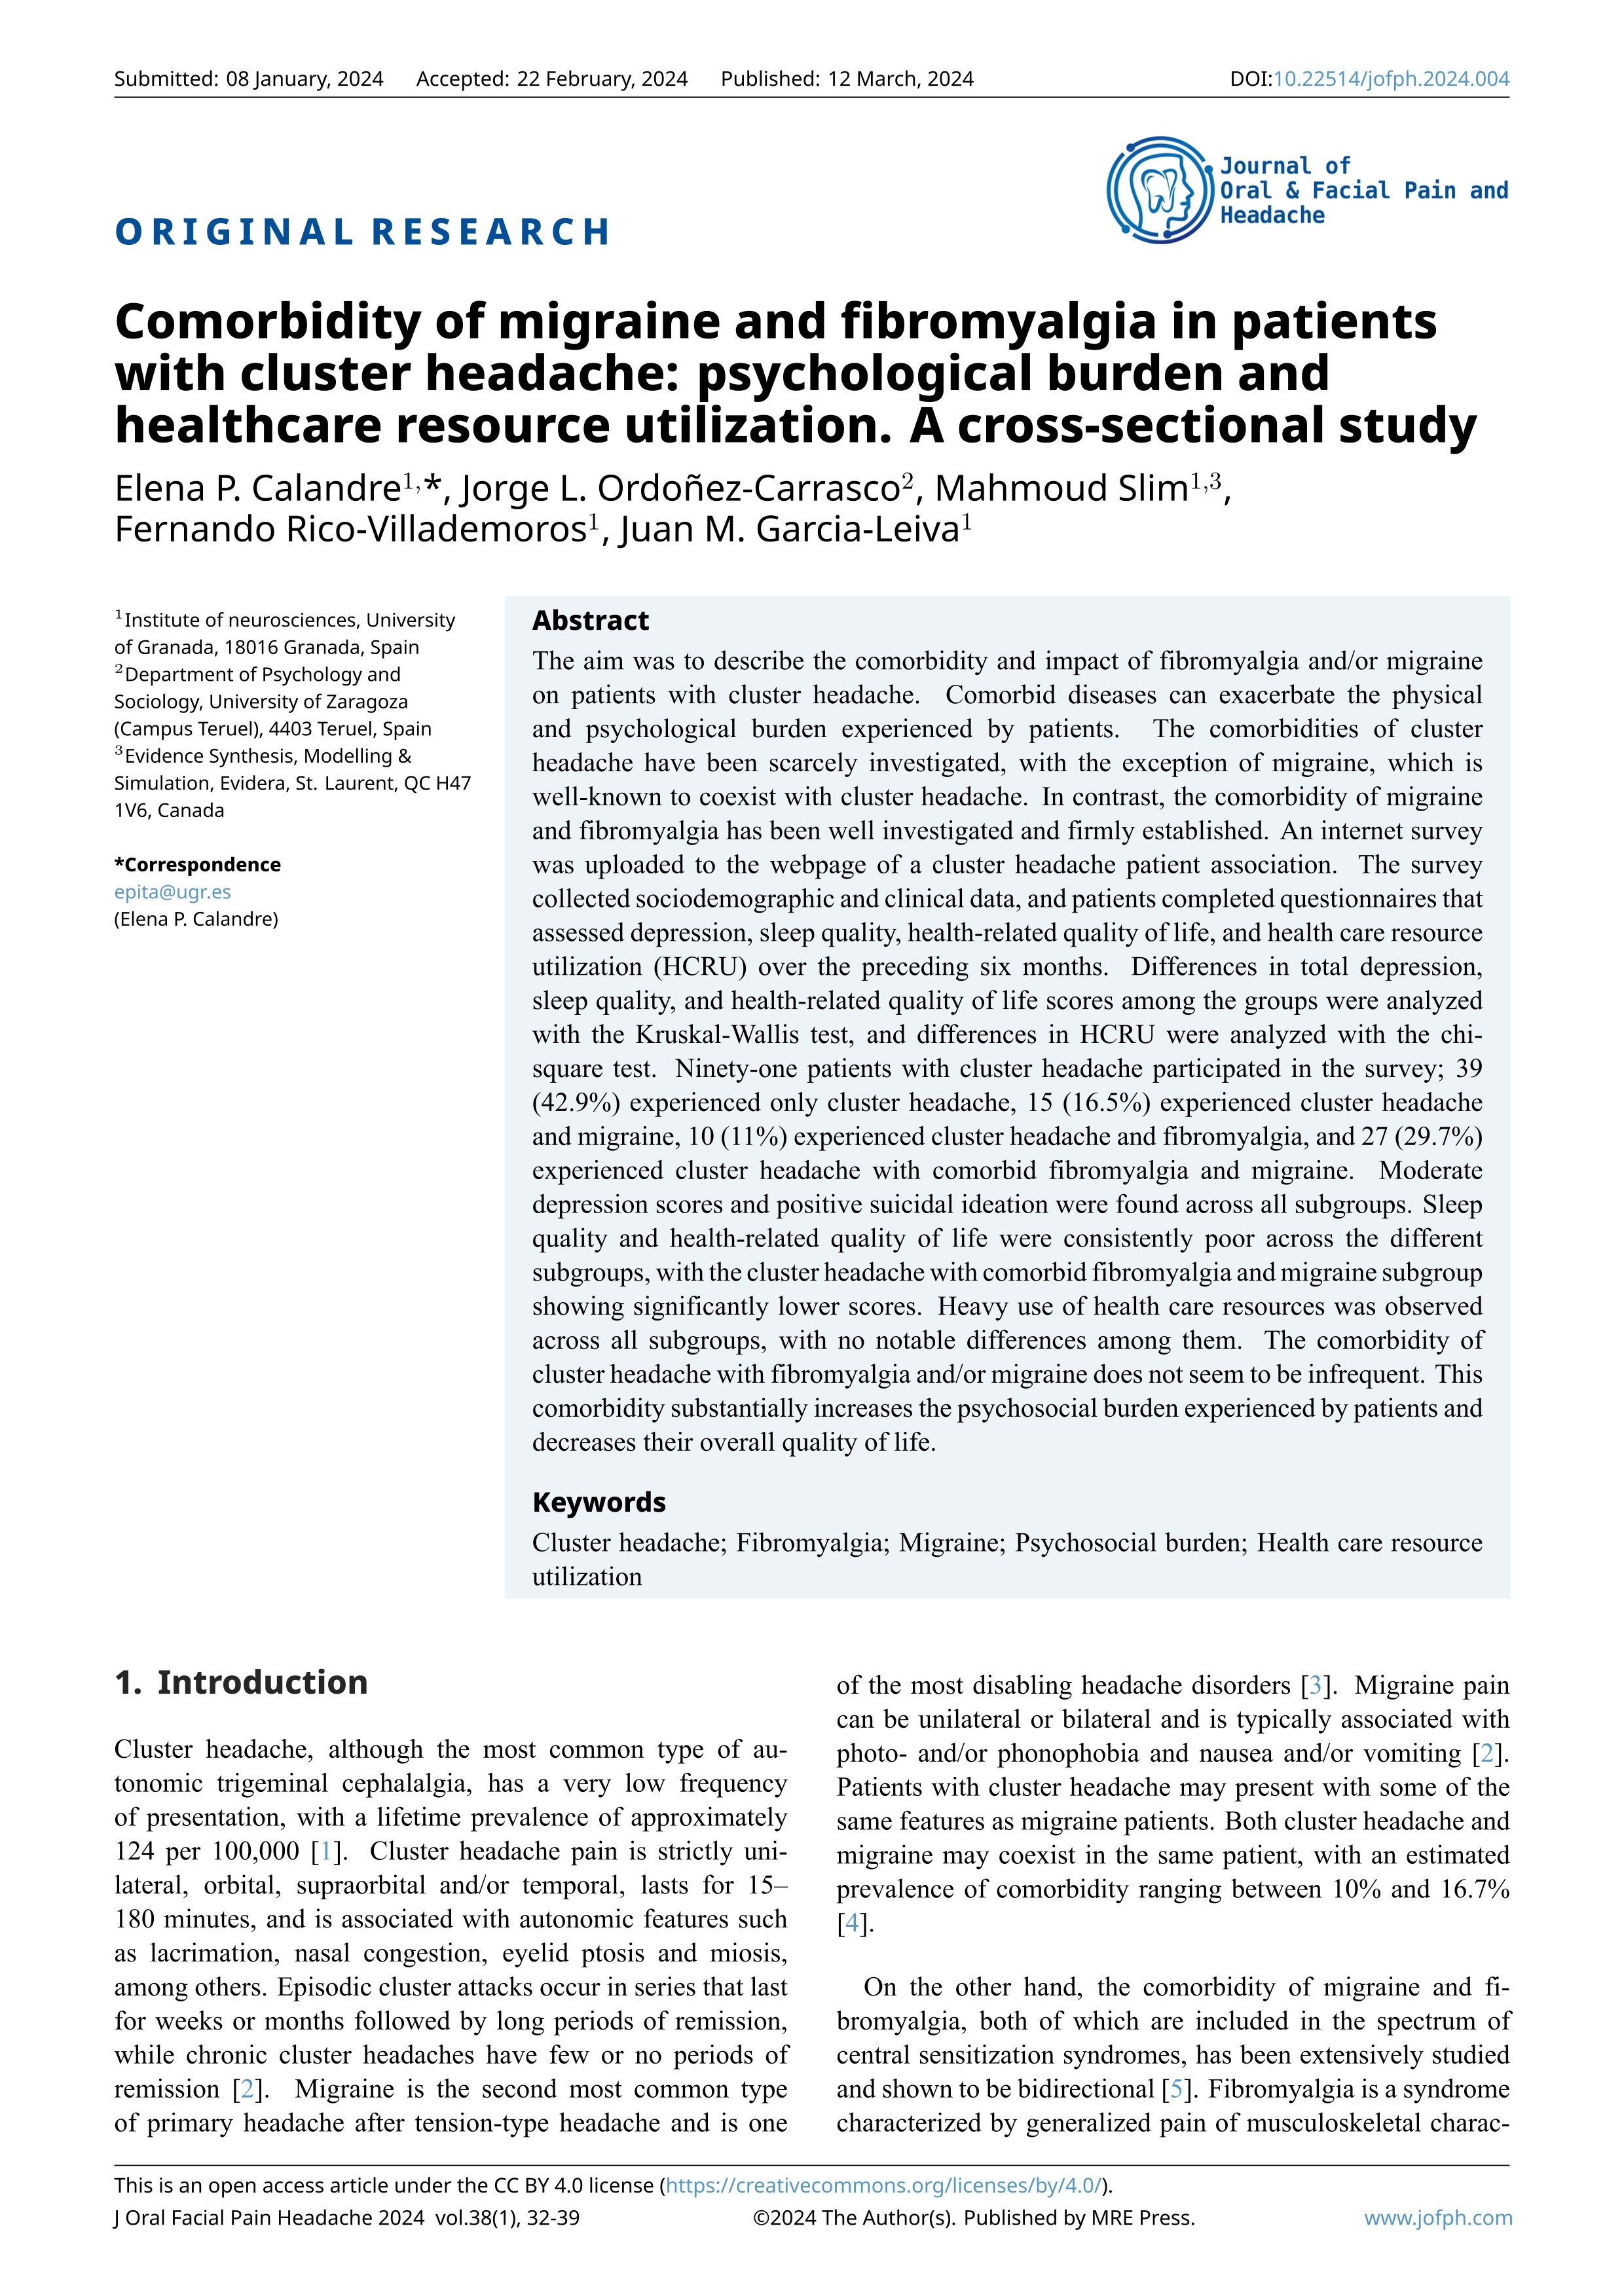 Comorbidity of migraine and fibromyalgia in patients with cluster headache: psychological burden and healthcare resource utilization. A cross-sectional study